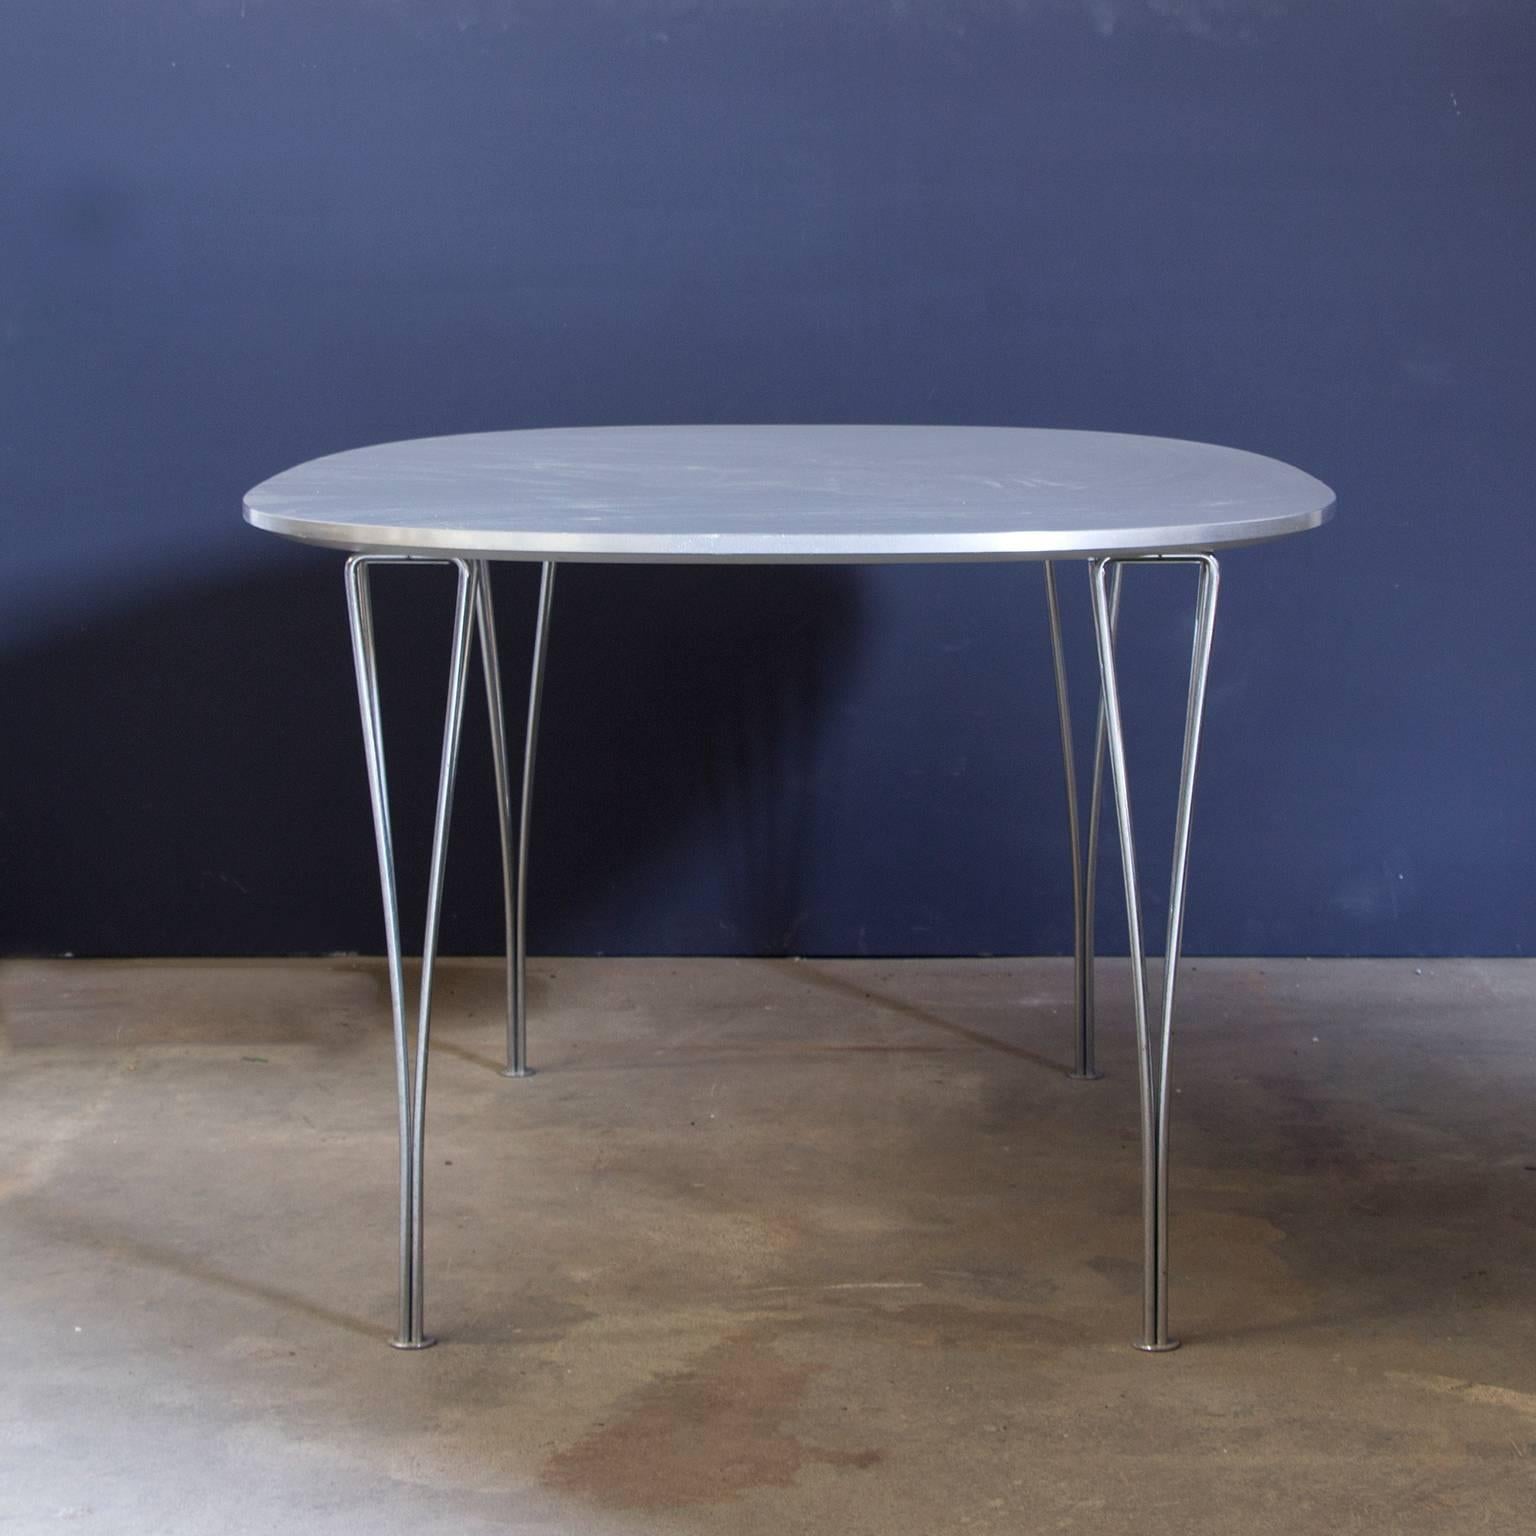 Beautiful table with elegant design by Fritz Hansen (see picture #9) some traces of wear like some light scratches on the tabletop and on the edge as well as some rusty spots on the legs, but still in good condition.
Measure: The tabletop is 2.5 cm